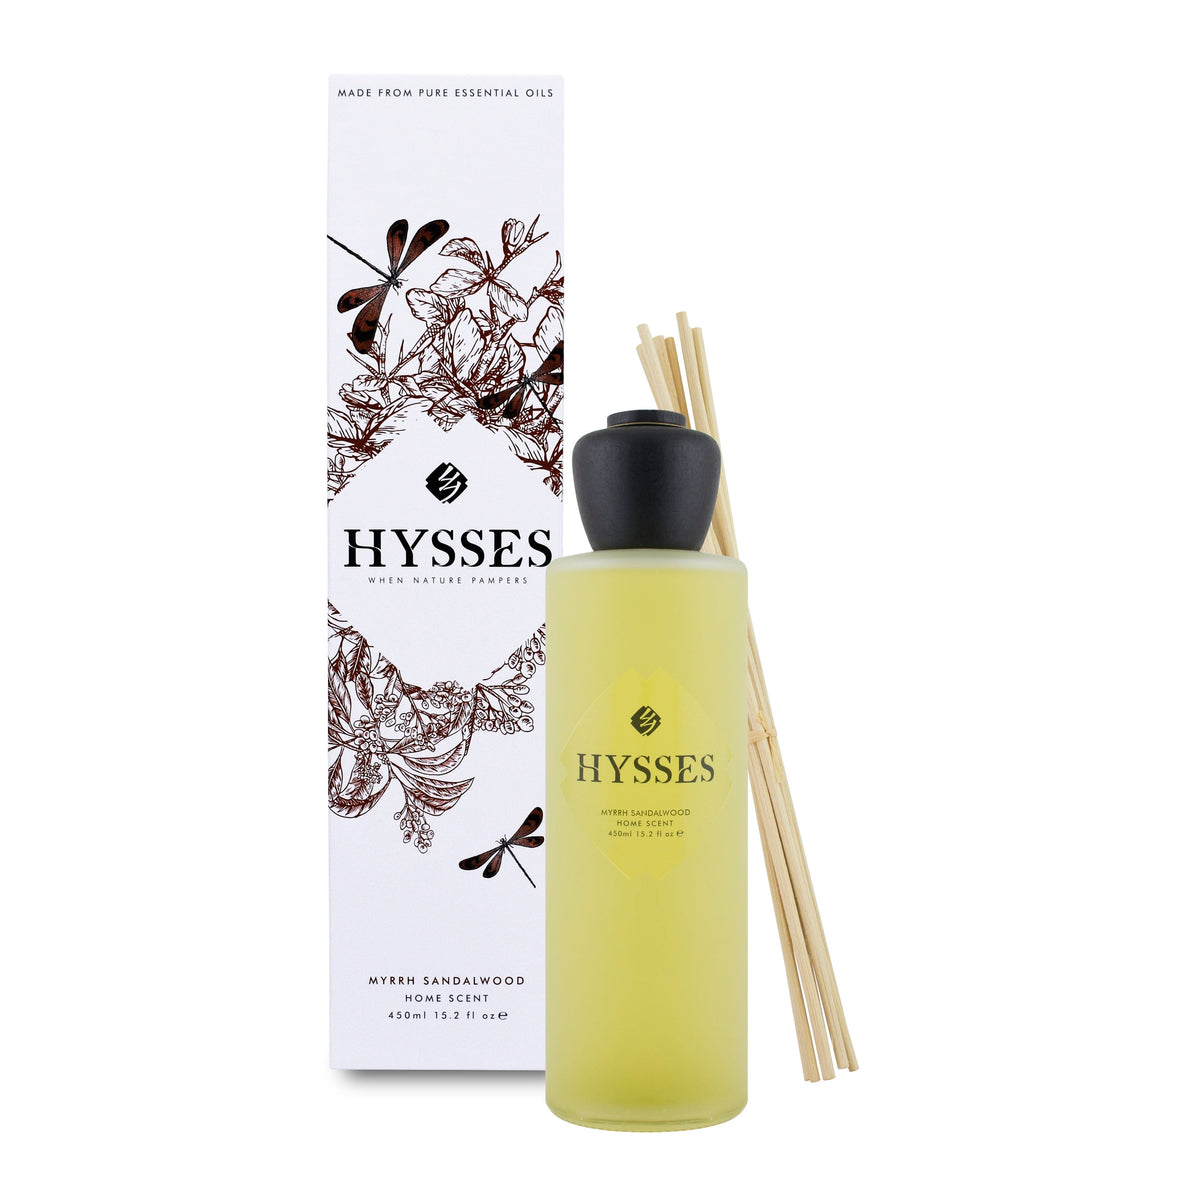 Hysses Home Scents 450ml Home Scent Reed Diffuser Myrrh Sandalwood